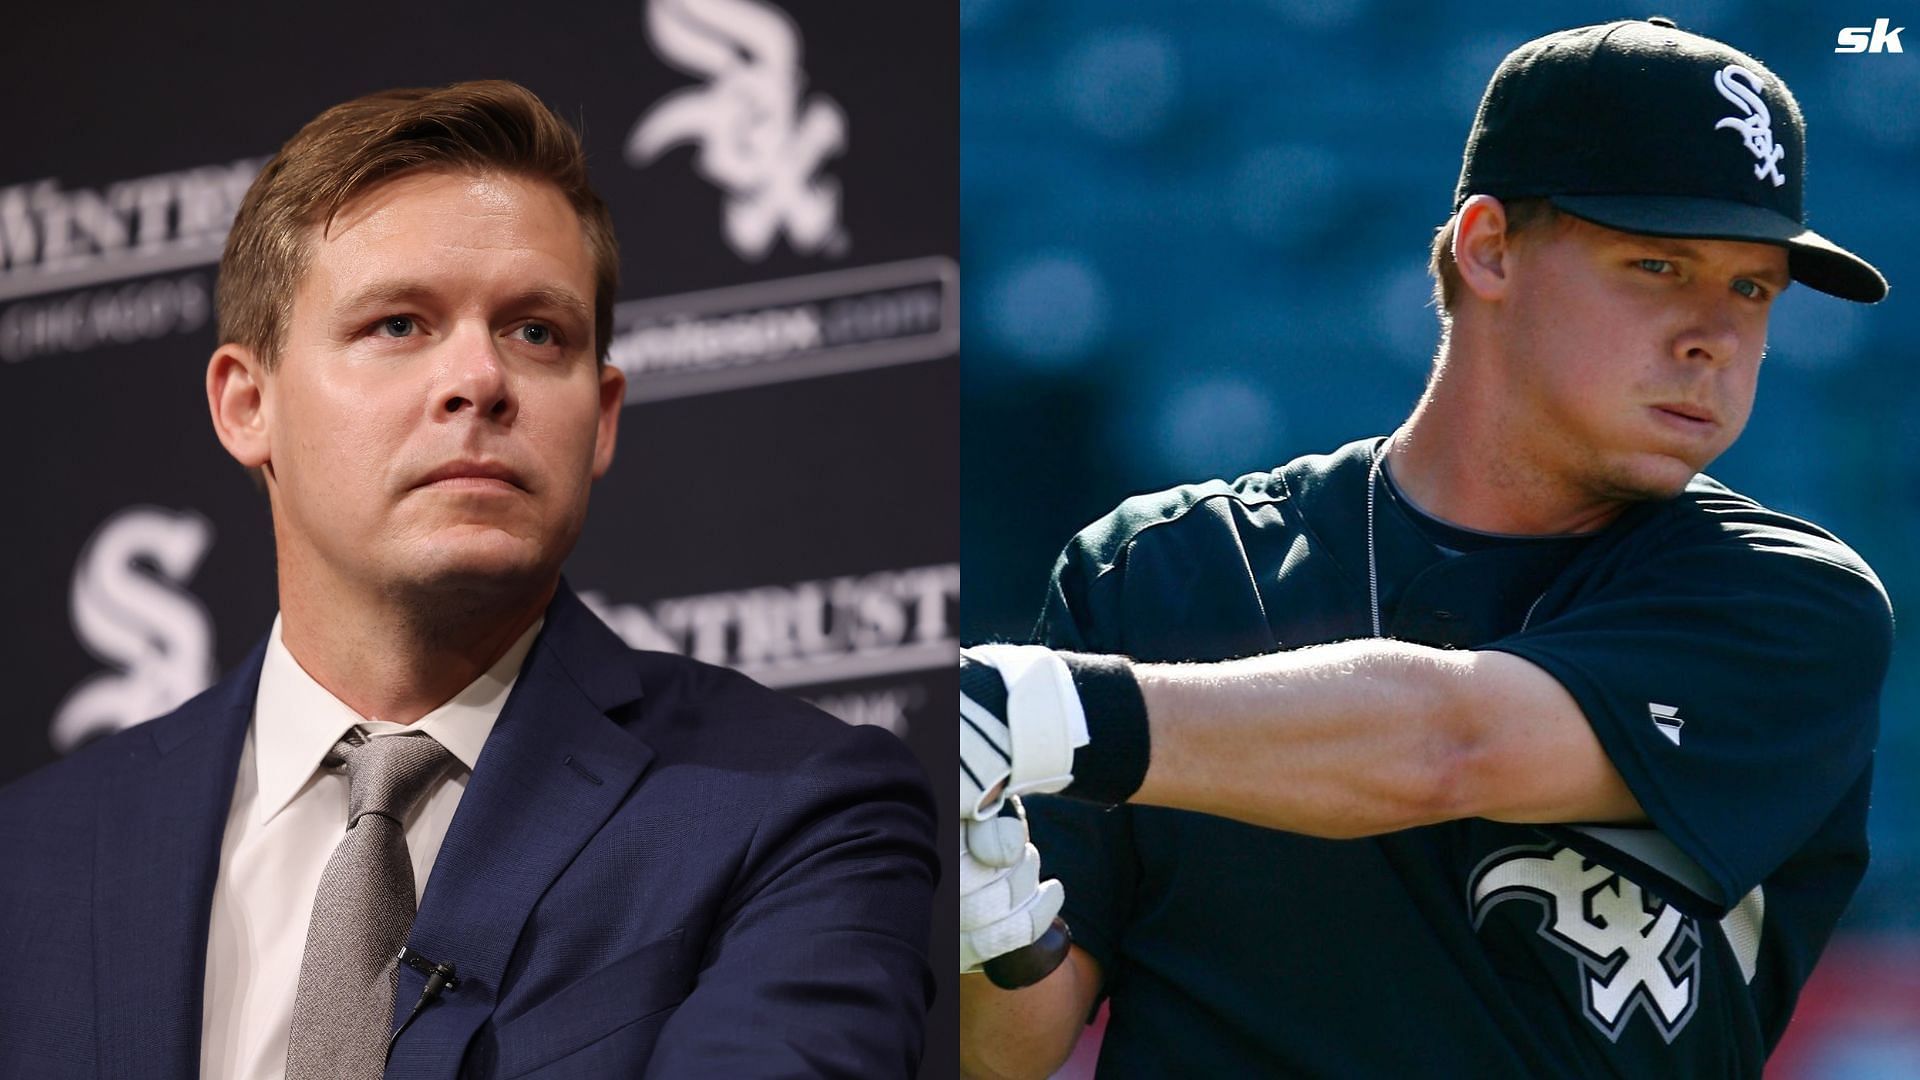 New White Sox GM Chris Getz is dissapointed with the roster